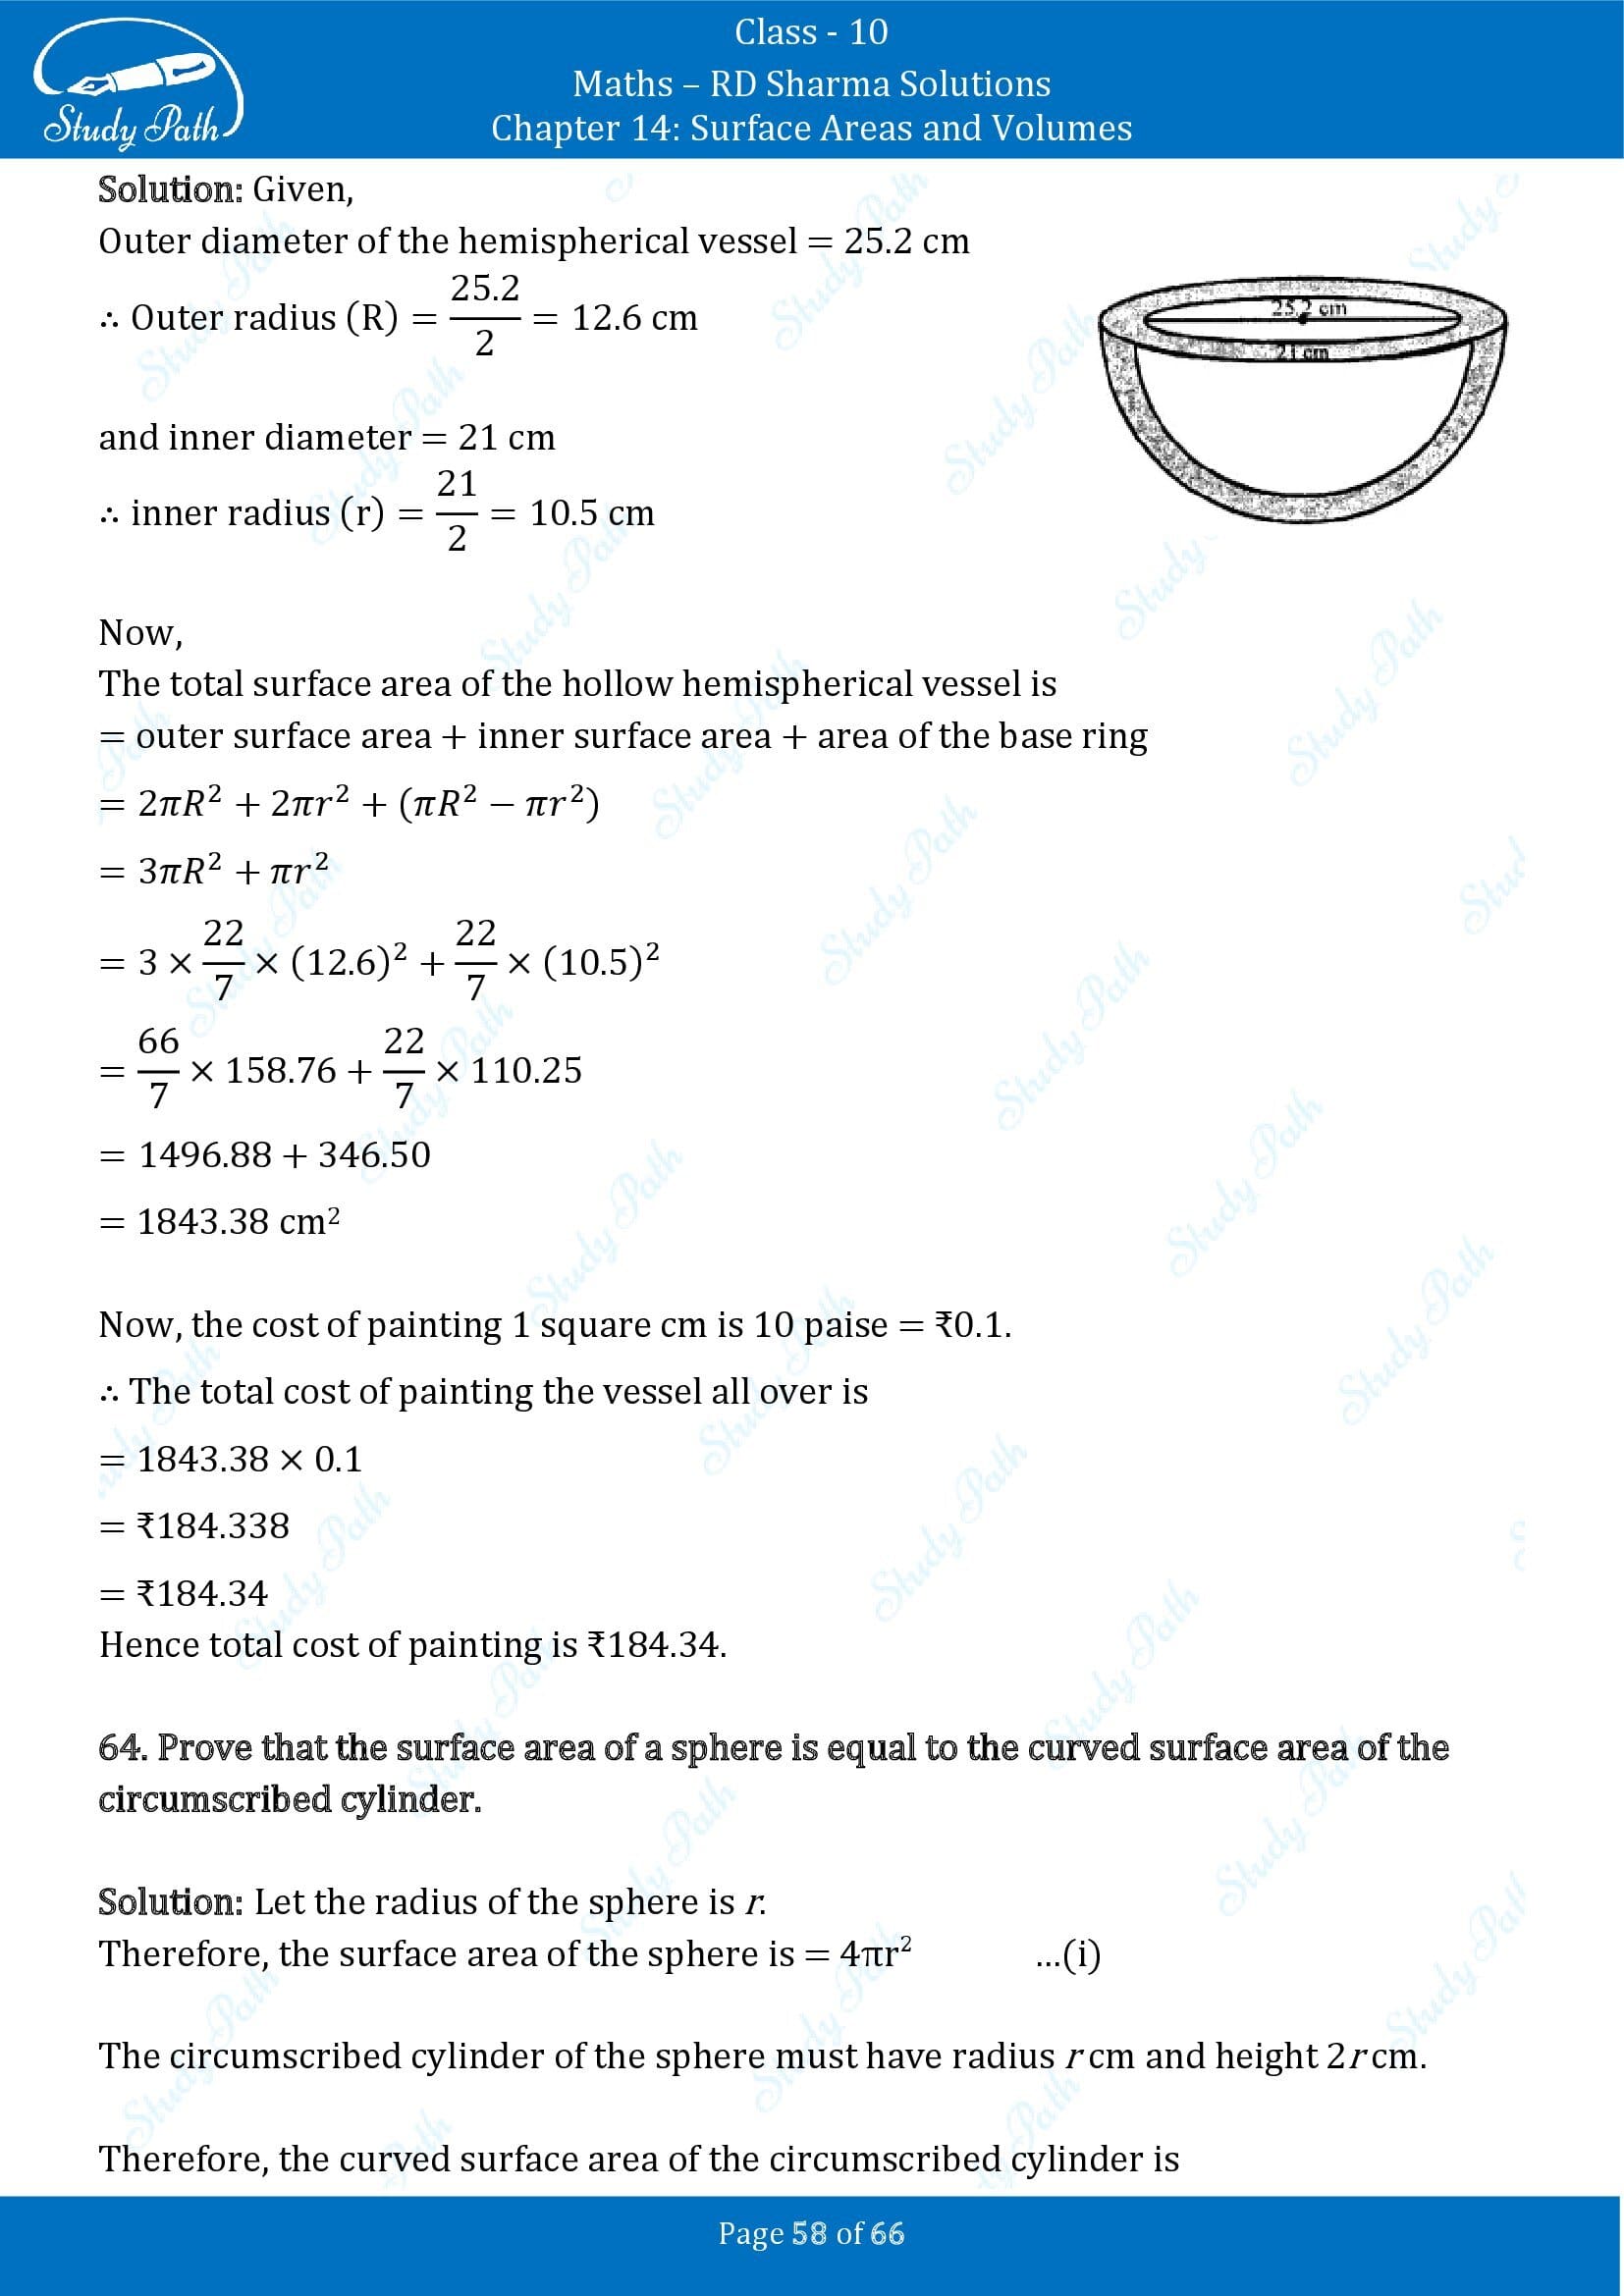 RD Sharma Solutions Class 10 Chapter 14 Surface Areas and Volumes Exercise 14.1 00058